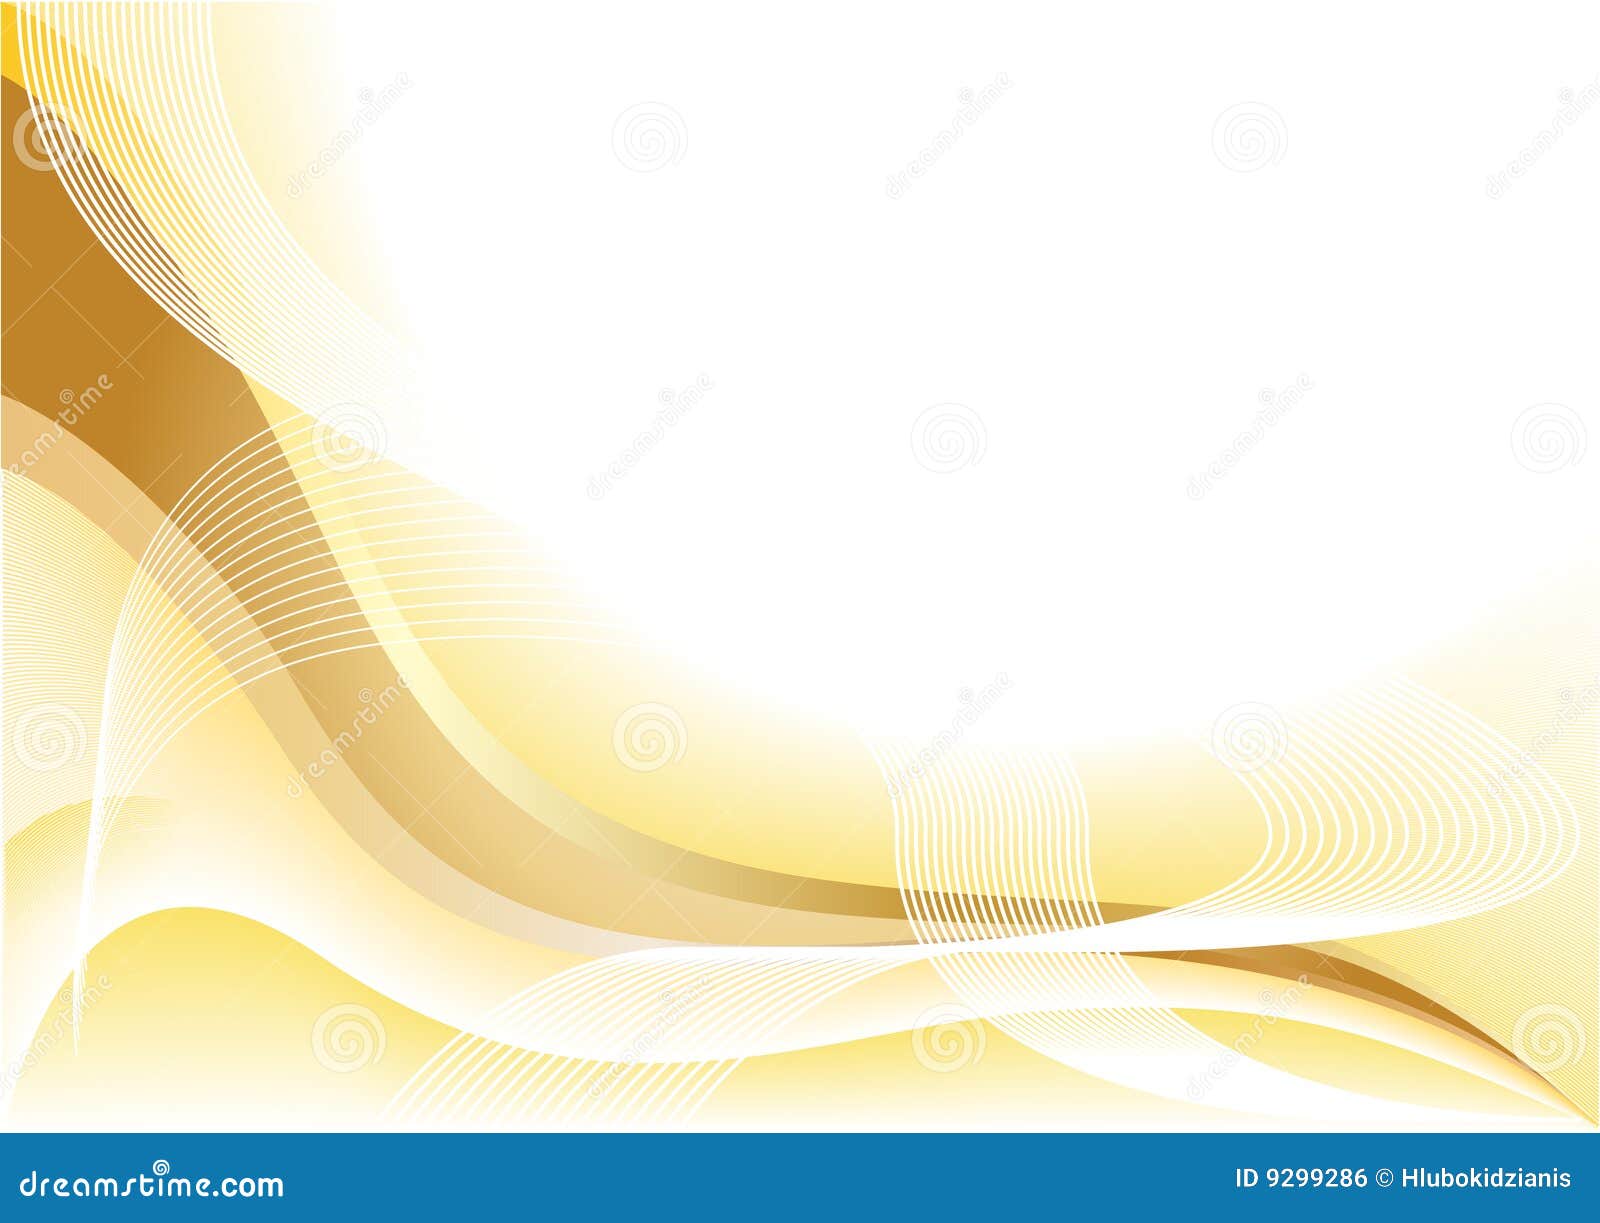 Vector Yellow Wave Background Stock Illustrations – 113,260 Vector Yellow  Wave Background Stock Illustrations, Vectors & Clipart - Dreamstime